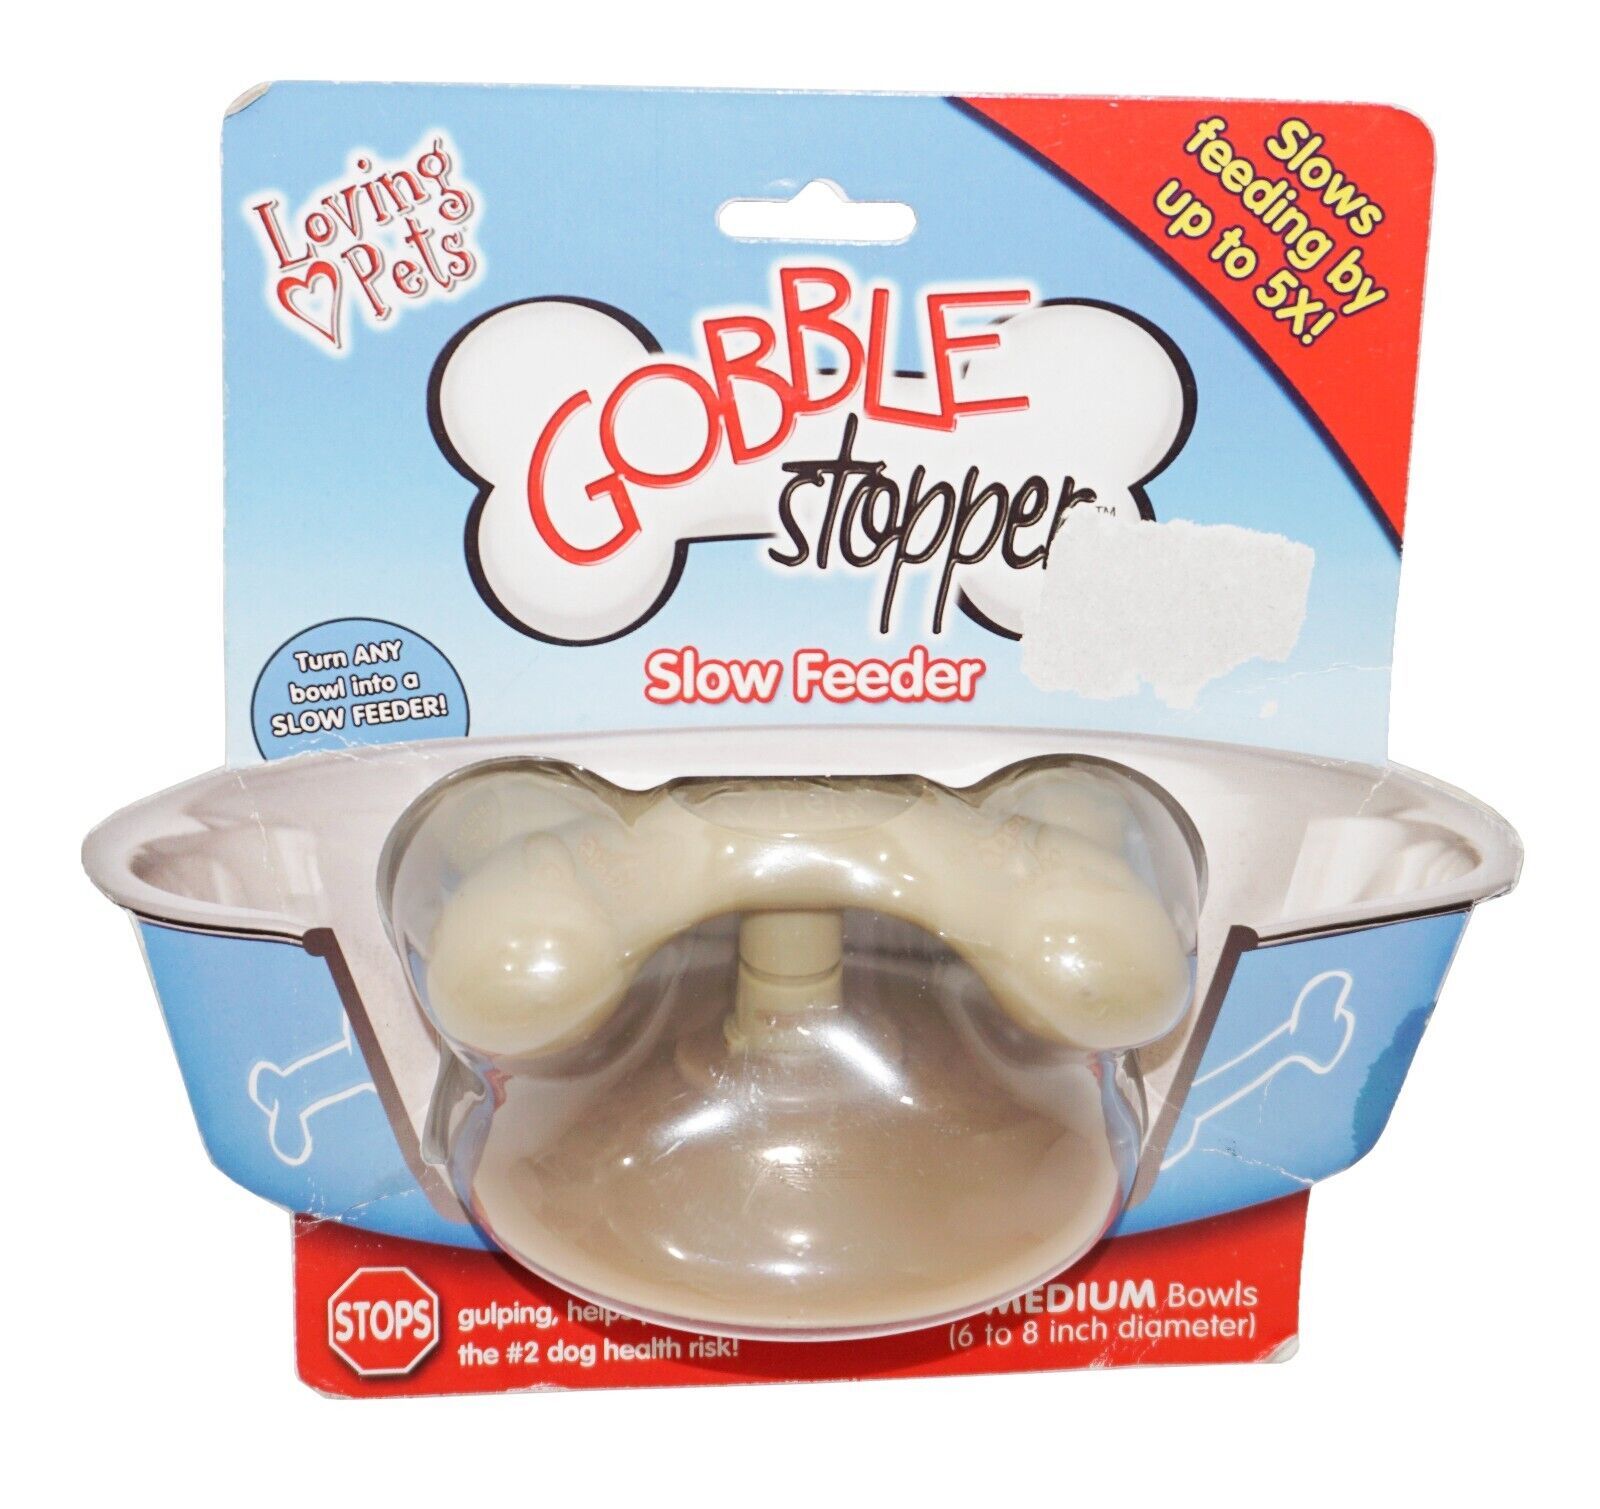 Primary image for Gobble Stopper Slow Feeder - By Loving Pets - Fits Medium Dog Bowls 6"-8"